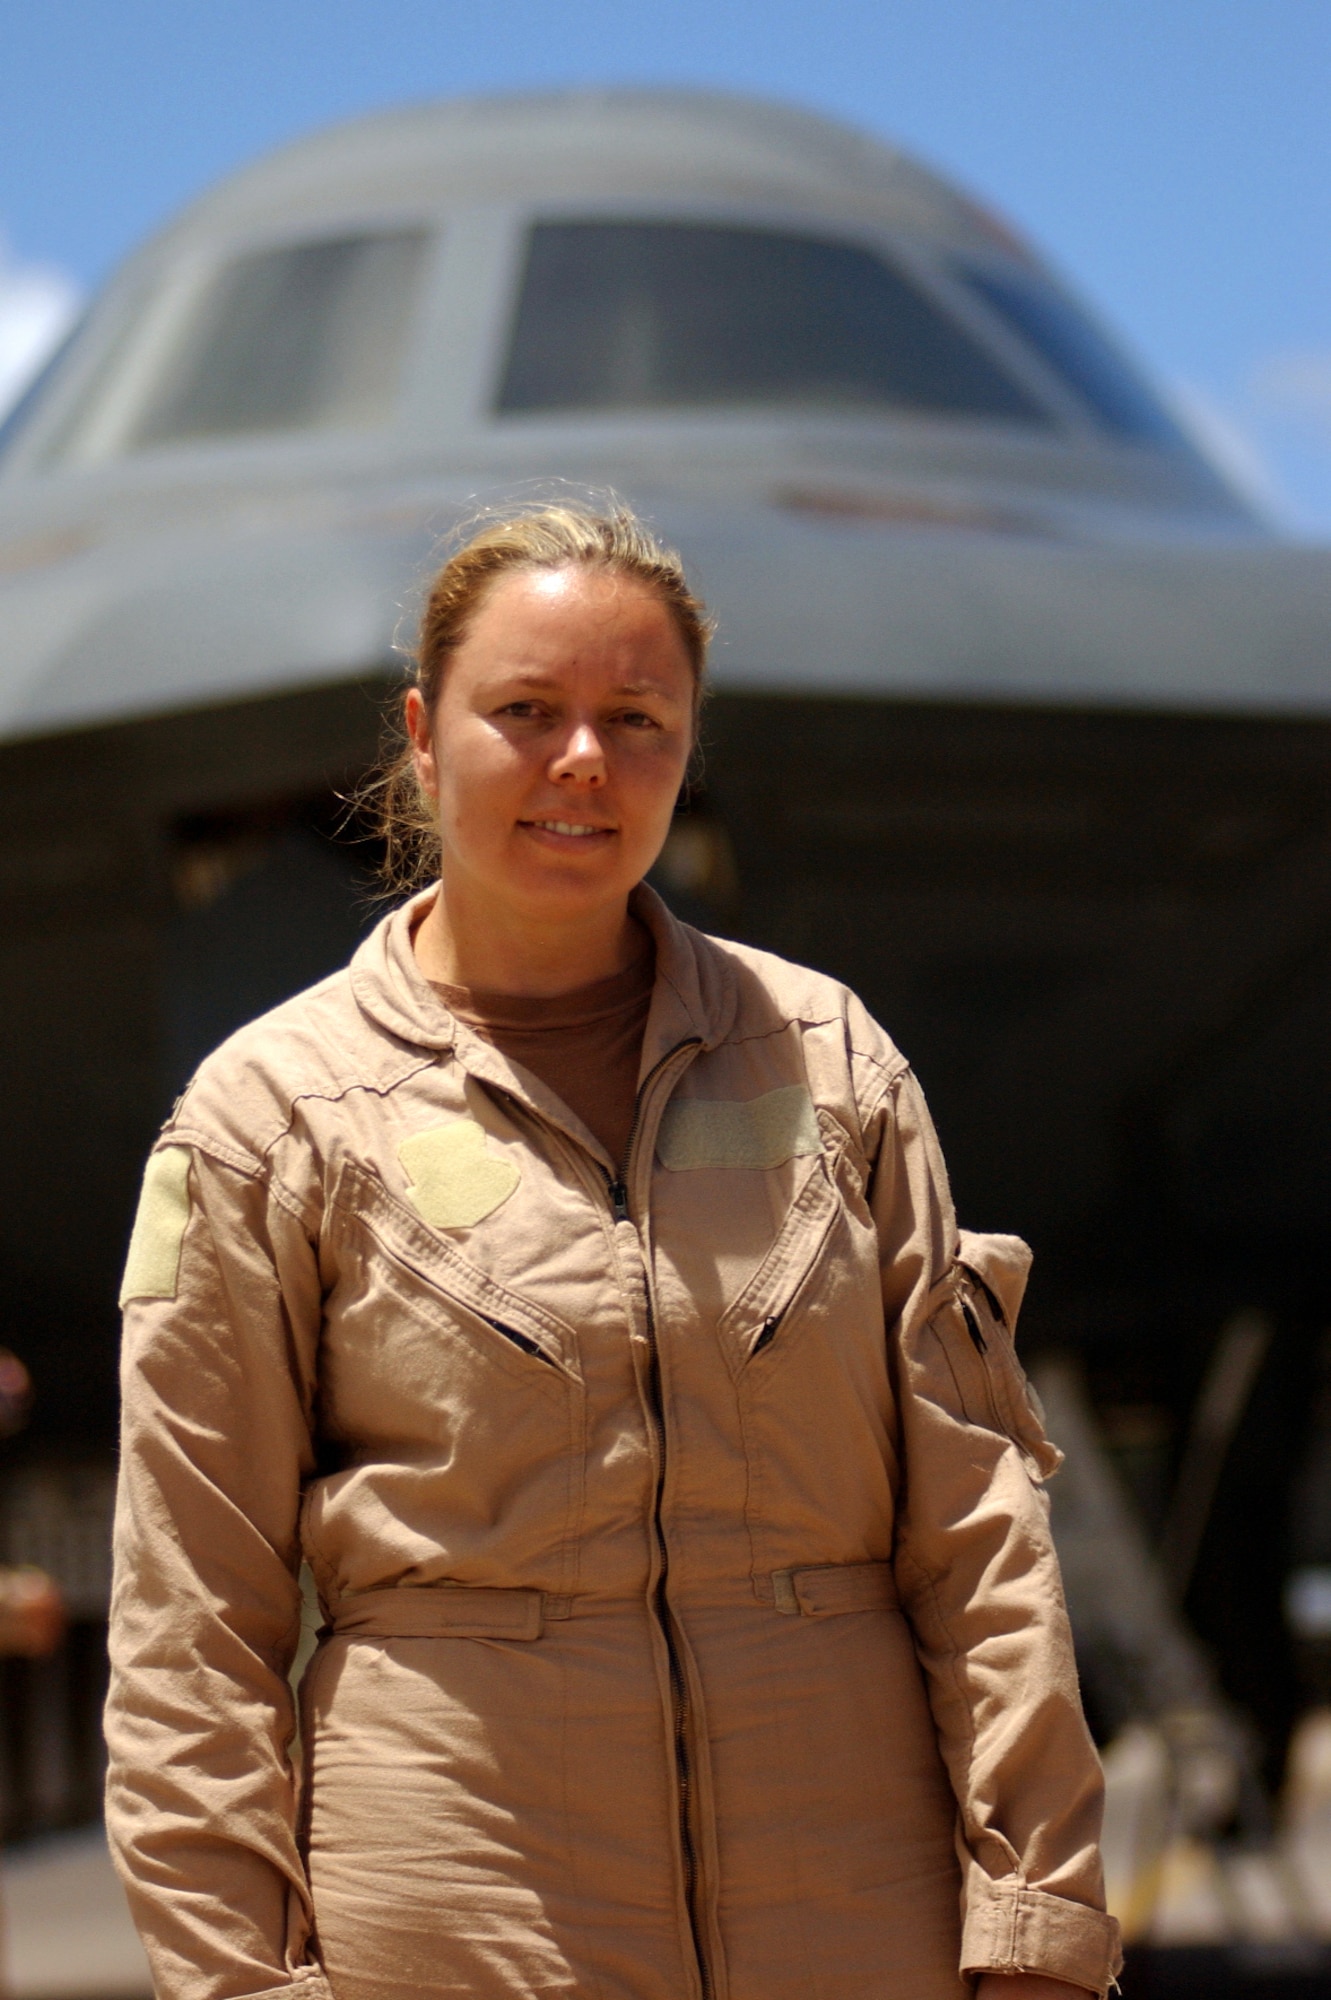 OPERATION IRAQI FREEDOM -- Capt. Jennifer Wilson, a B-2 Spirit pilot, is the first female B-2 pilot to fly a combat mission.  (U.S. Air Force photo by Tech. Sgt. Richard Freeland)